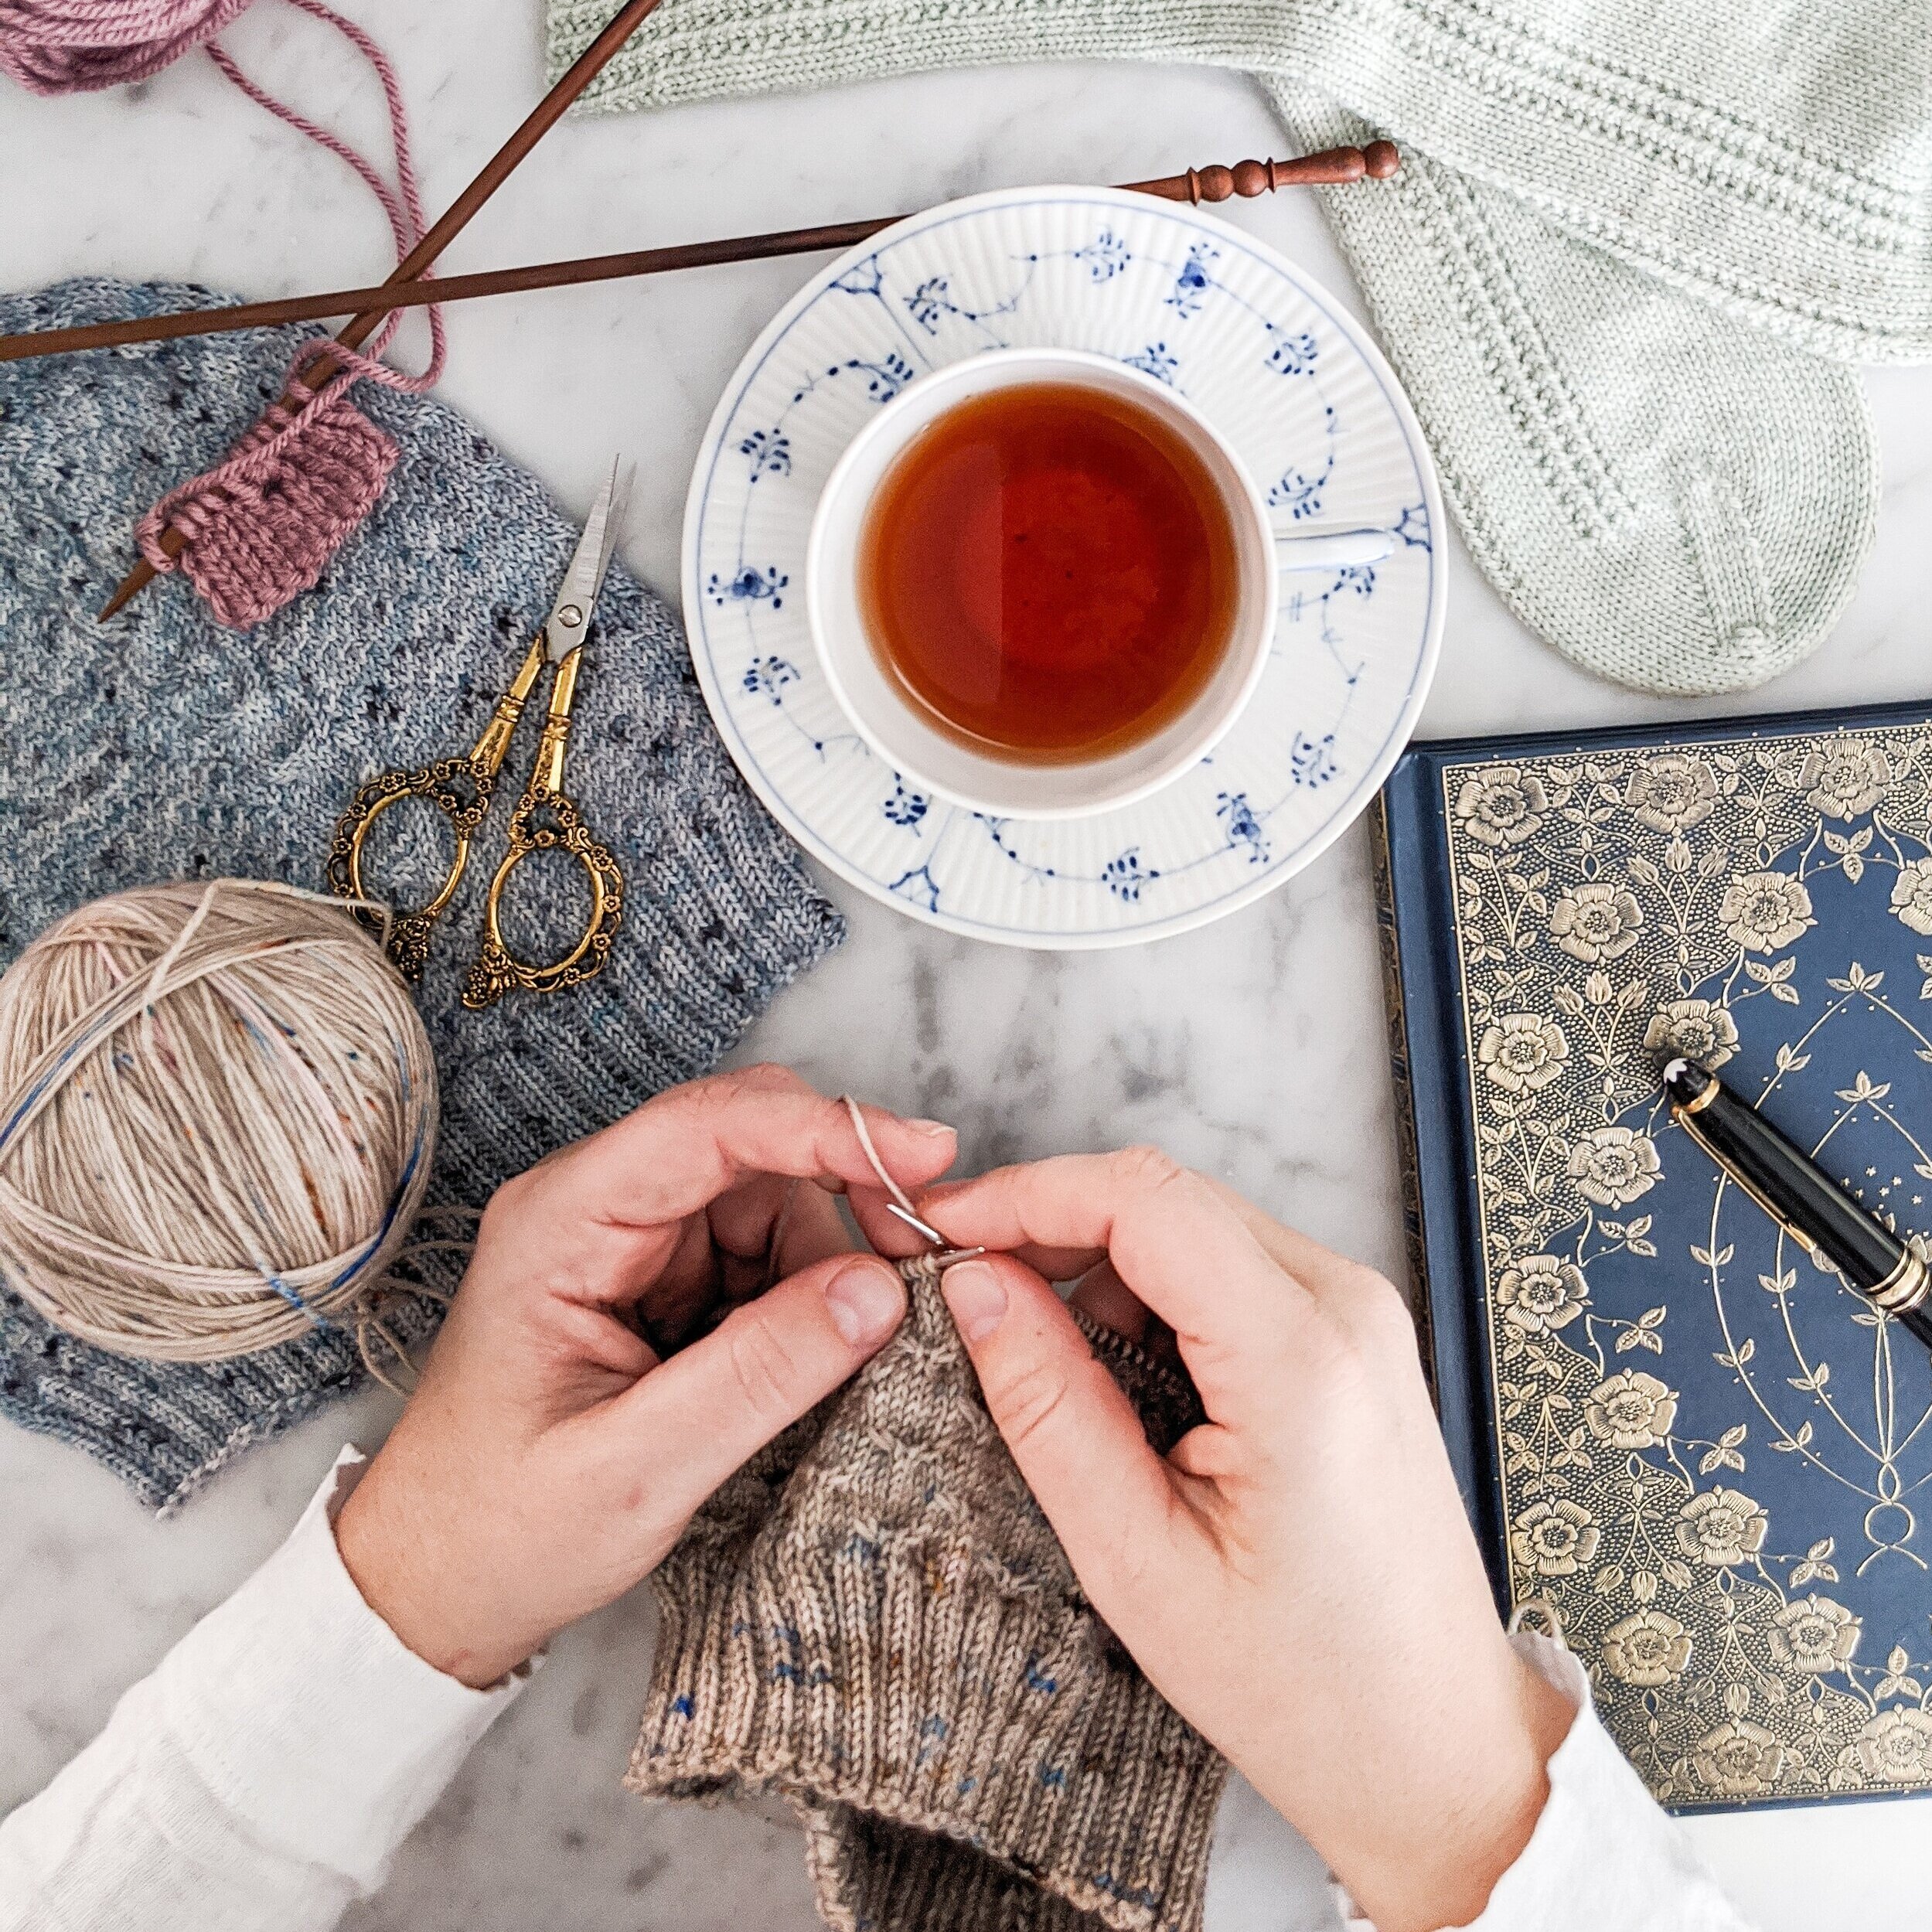 The Ultimate Beginners Guide to Knitting